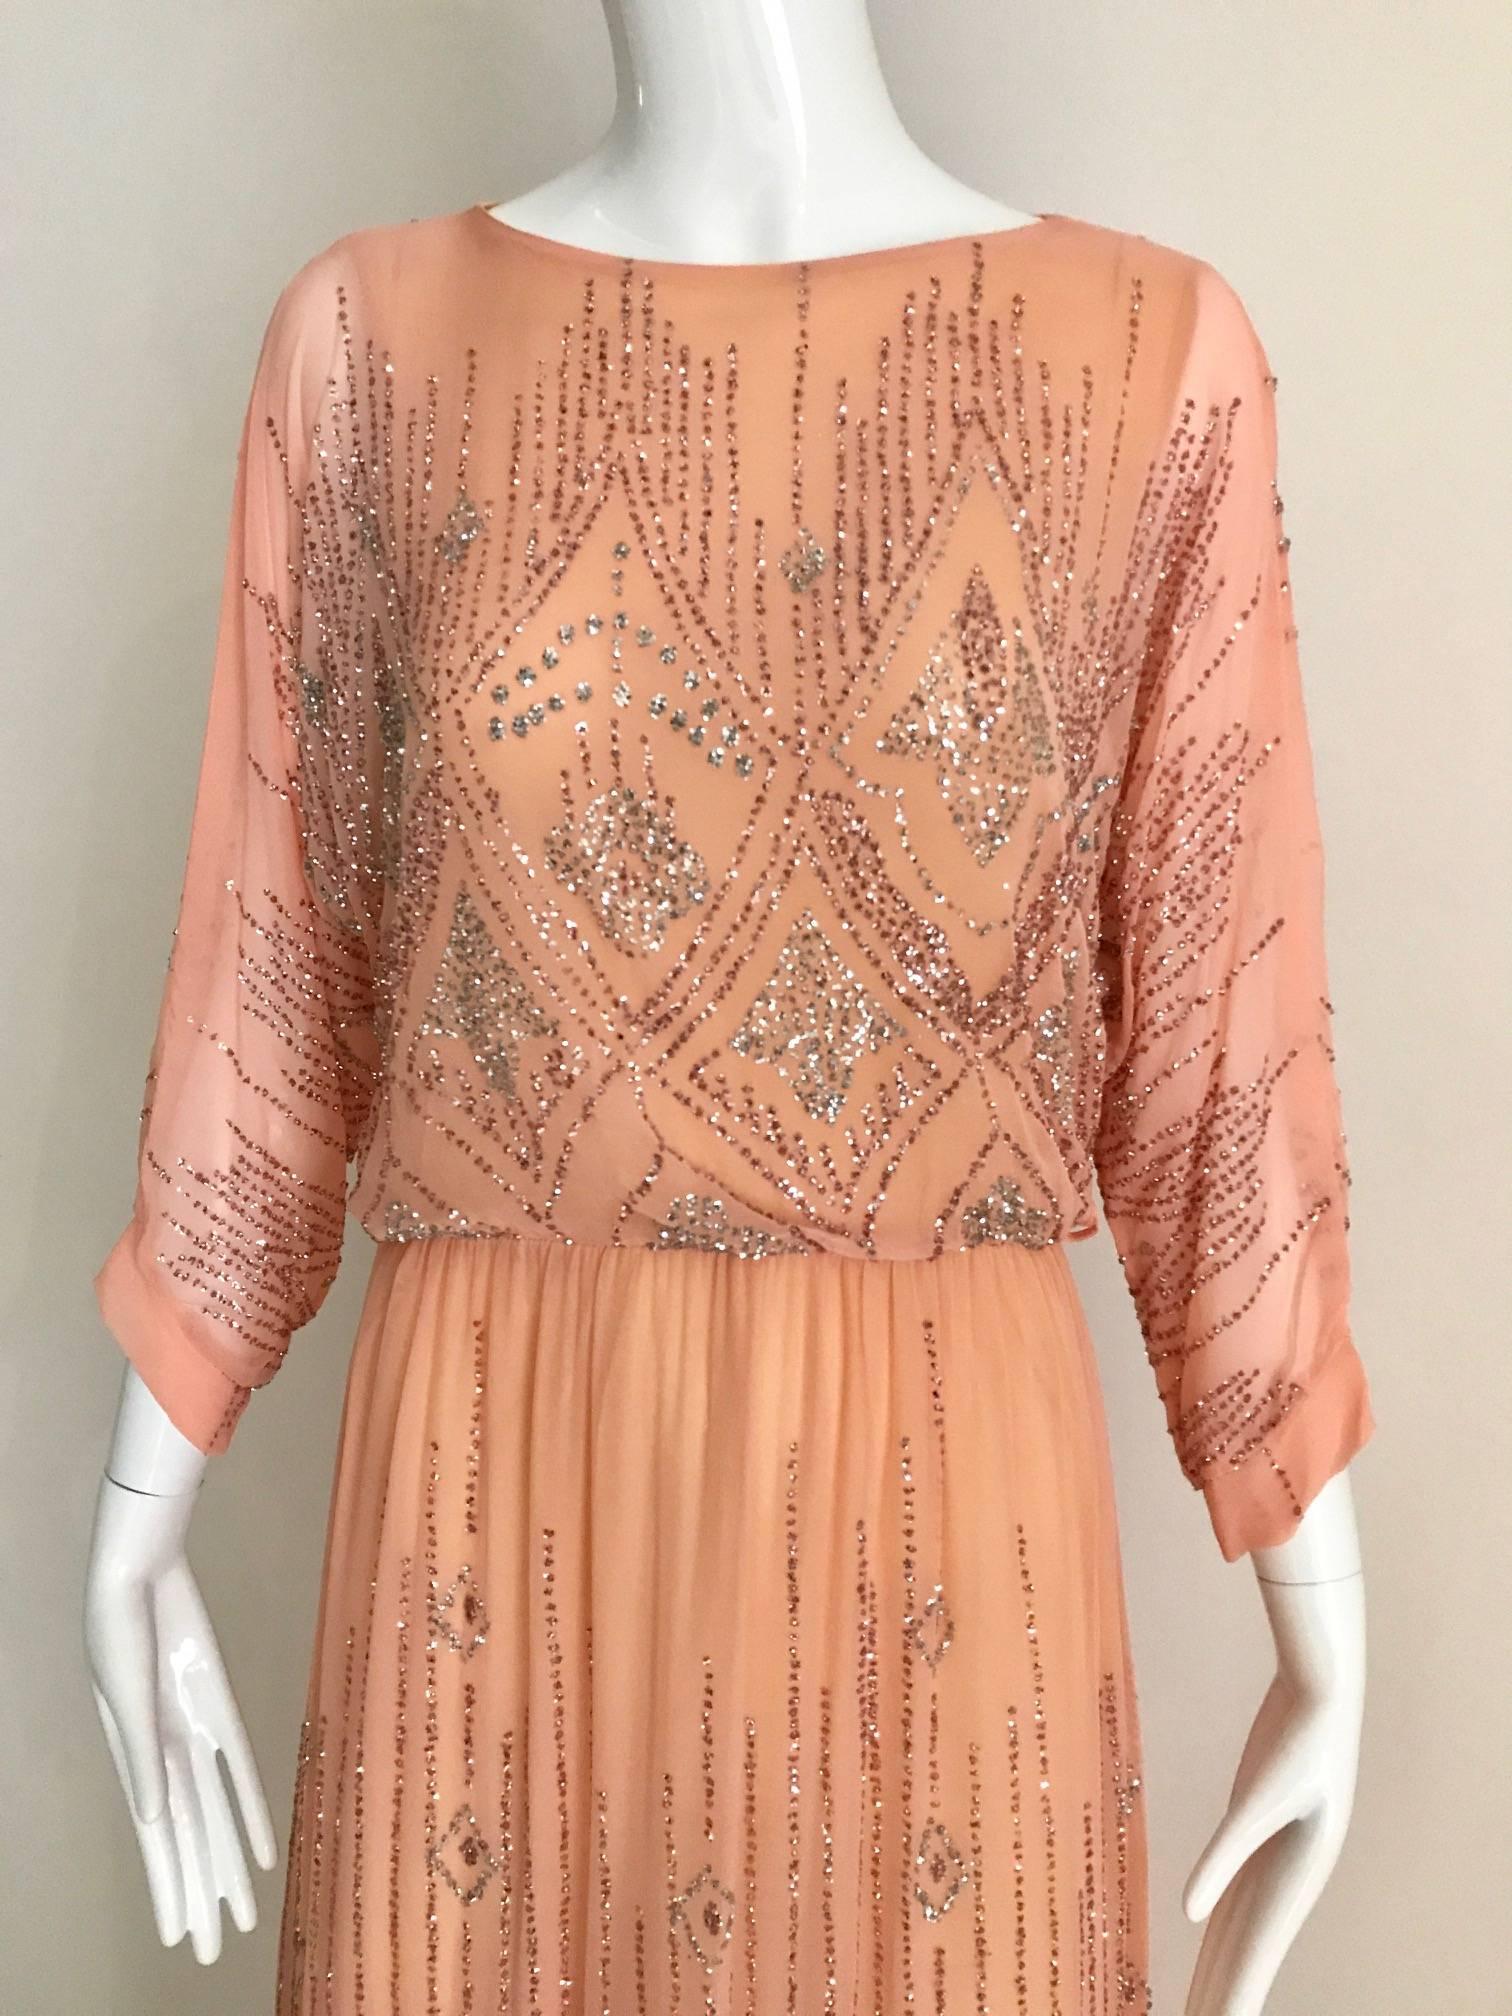 Vintage 1970s peachy pale pink crepe maxi dress covered in metallic glitters. Dress was sold in Saks Fifth ave boutique and dress is made in france. Elastic waist and slip on dress. Glitters color is in silver and almost redish mauve. 
Size: